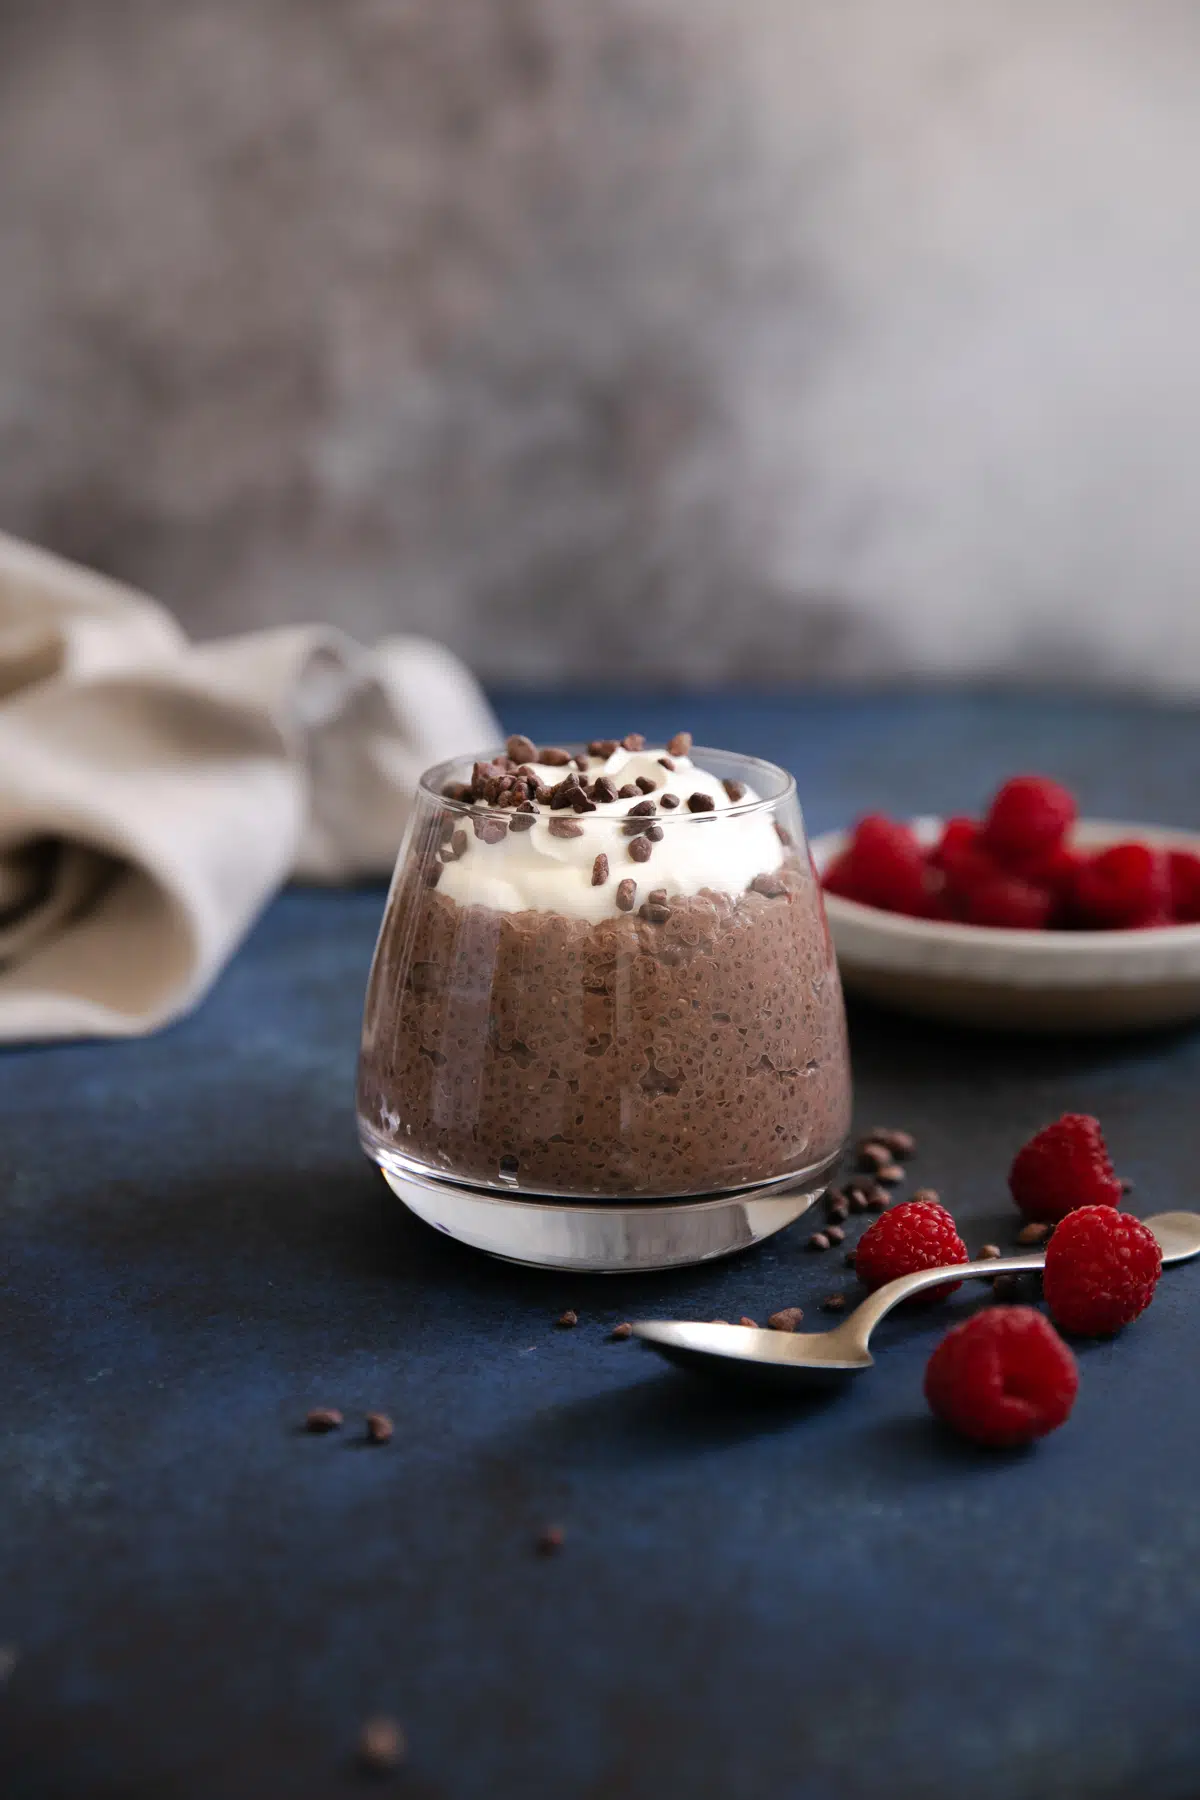 Glass jar filled with creamy chocolate chia pudding and topped with vanilla Greek yogurt, cocoa nibs, and served with a side of fresh raspberries.